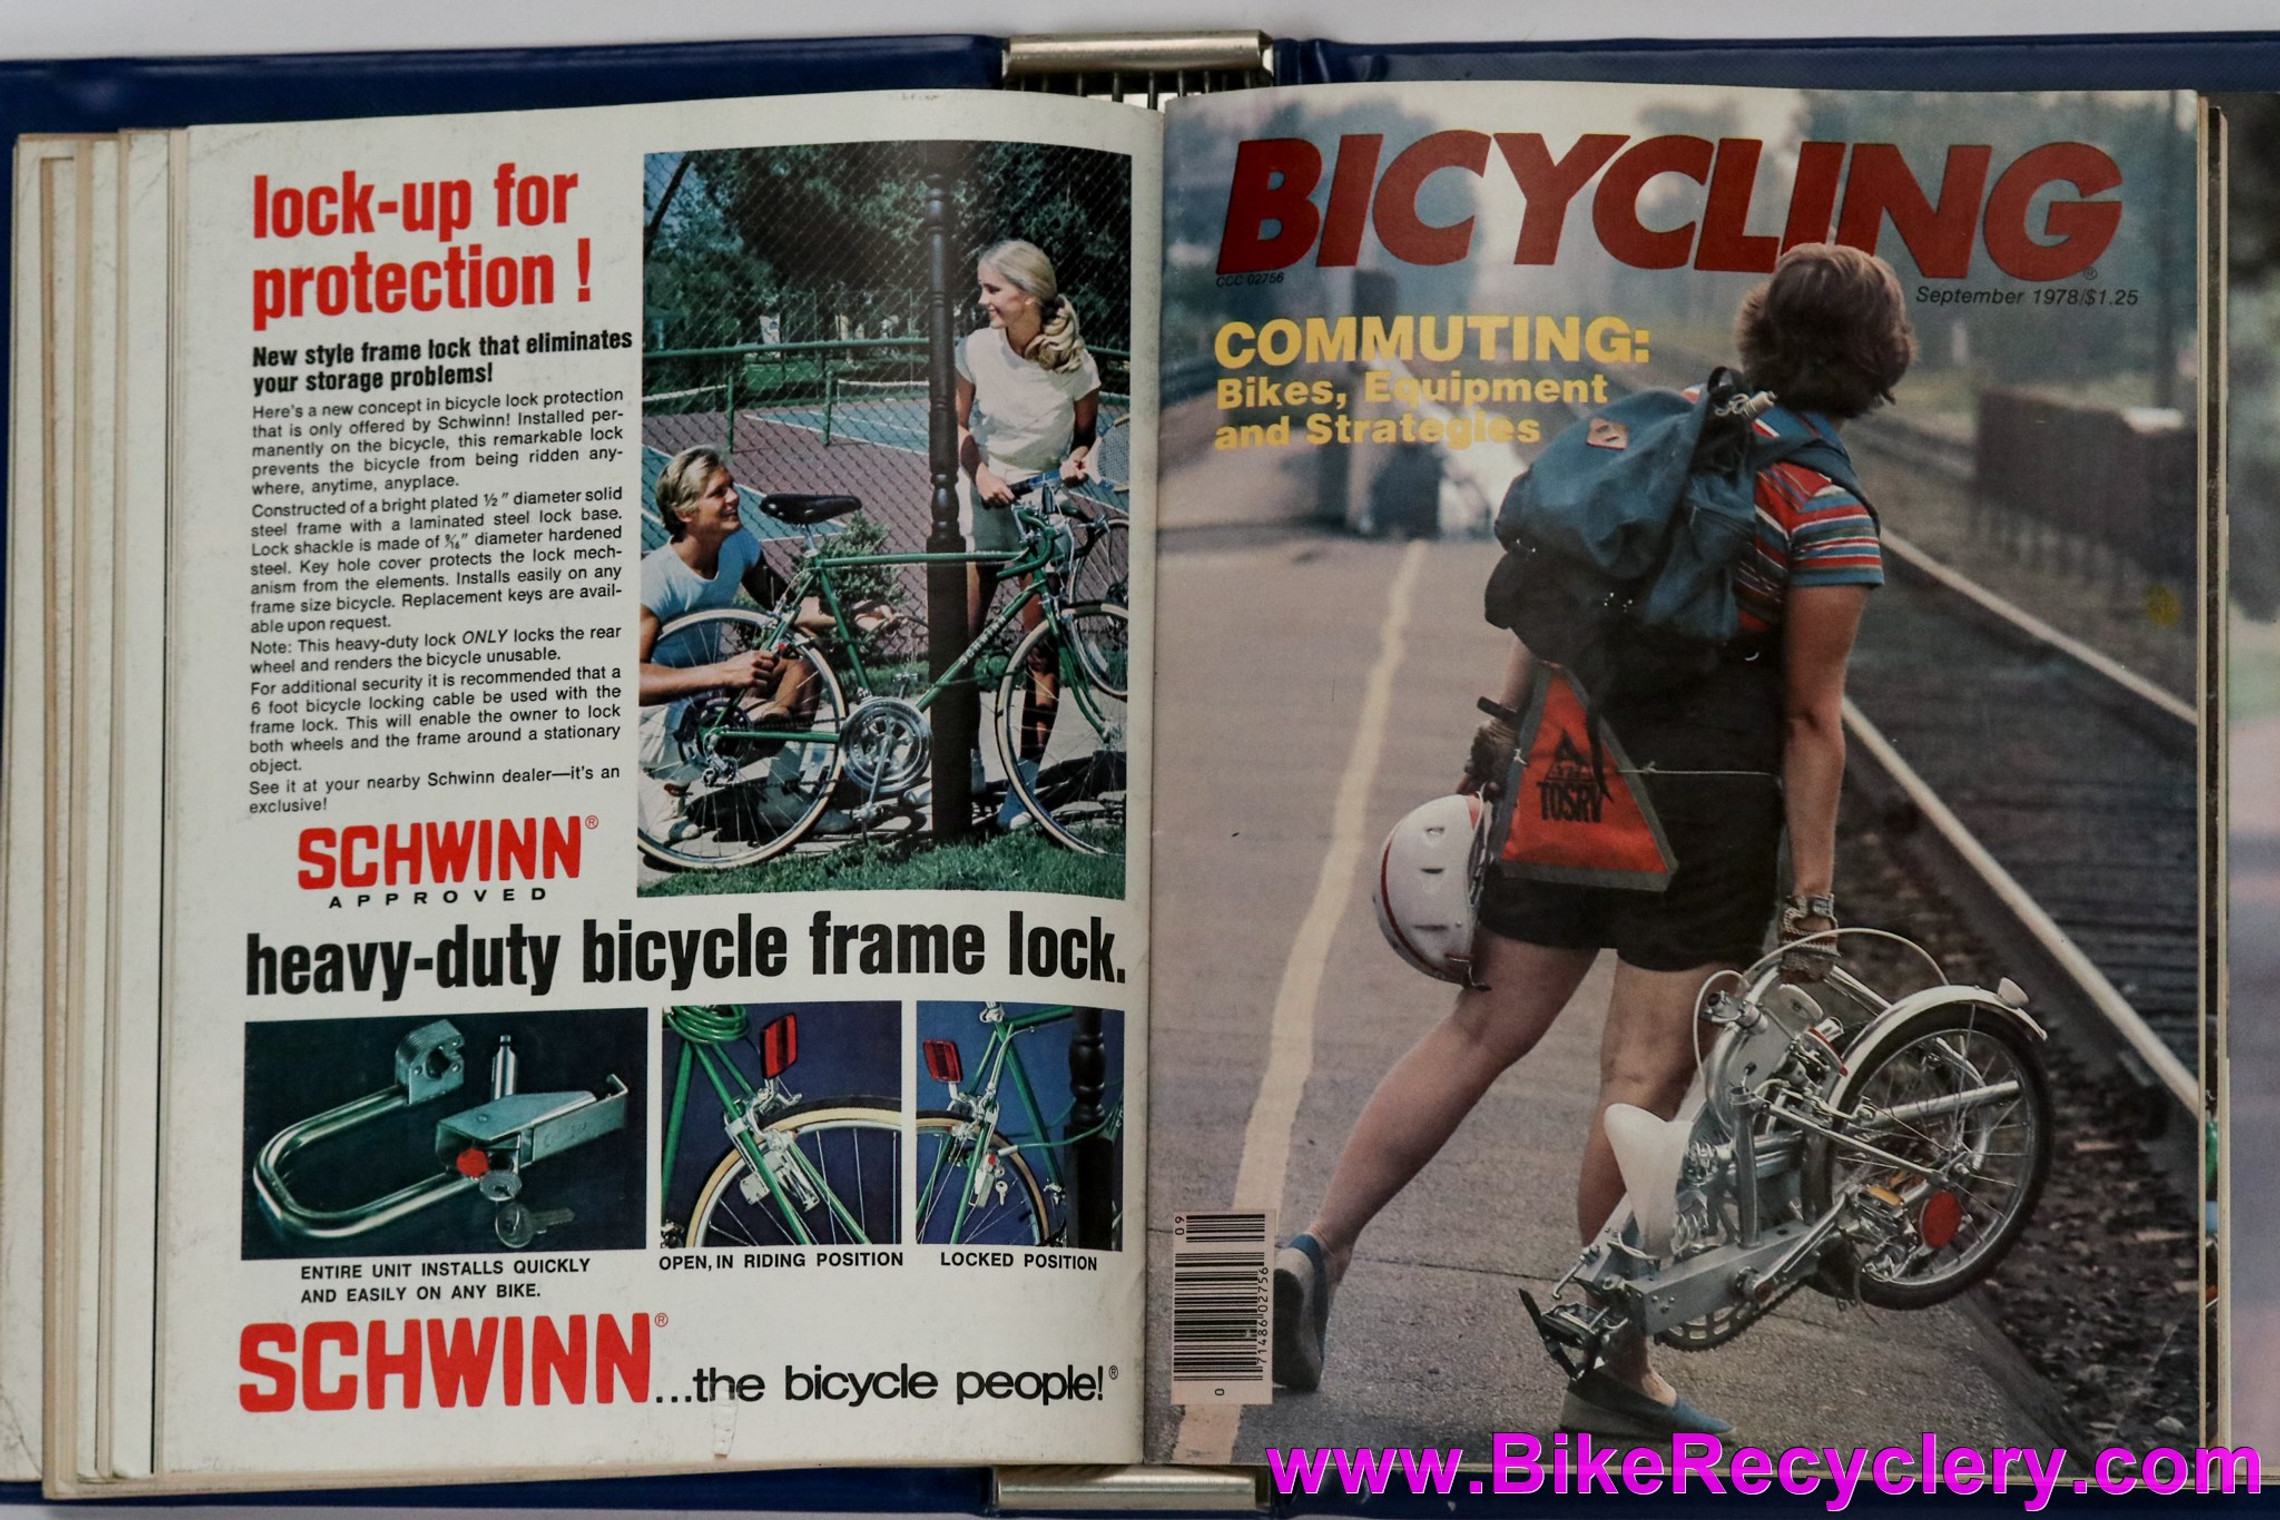 1978 Bicycling Magazine Set in Collectors Binder! 10 Issues (Near Mint)